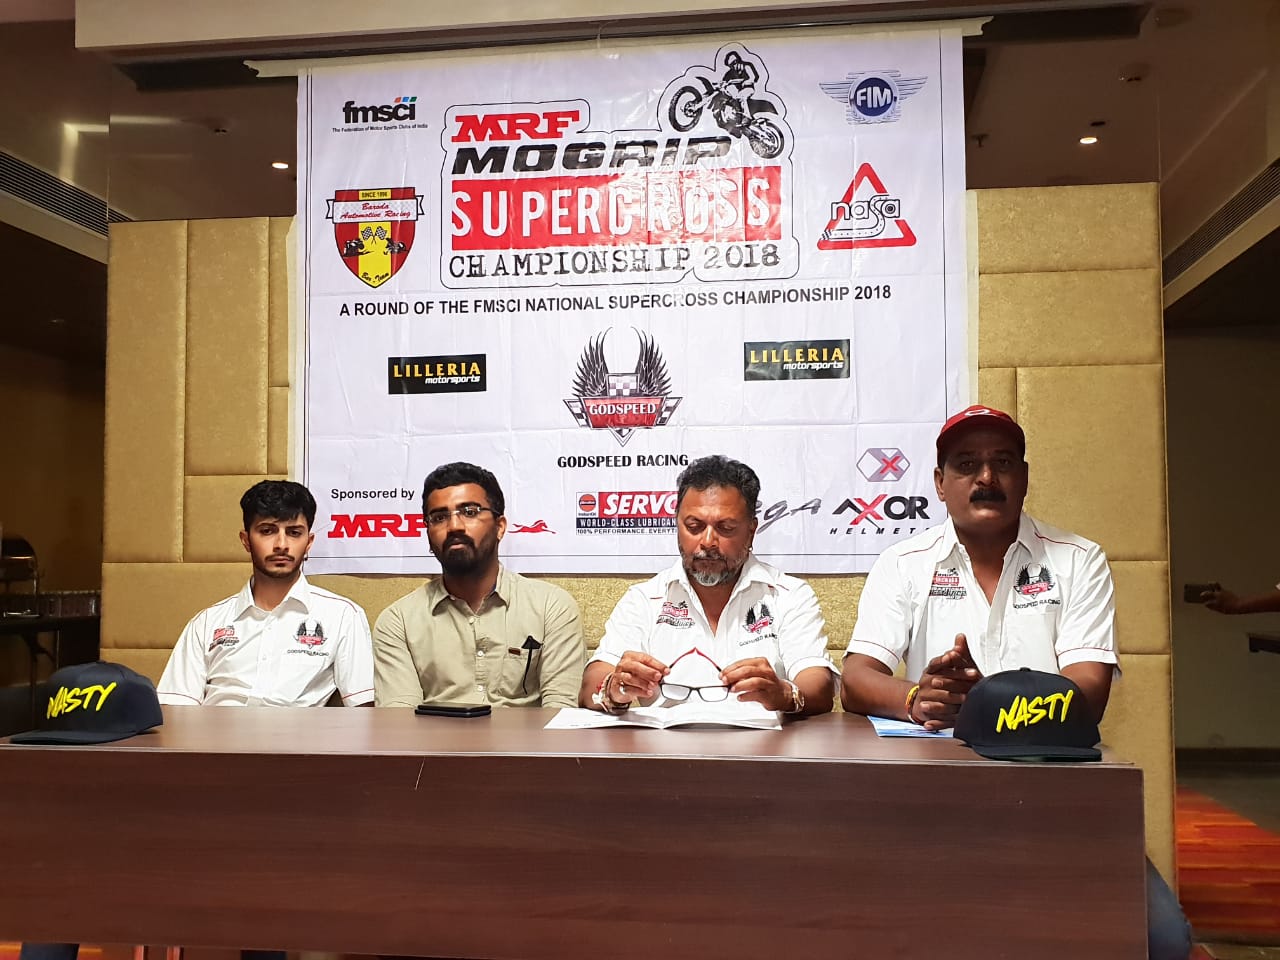 Vadodara all set to host the finale of 19th MRF MoGrip FMSCl National Supercross Championship 2018